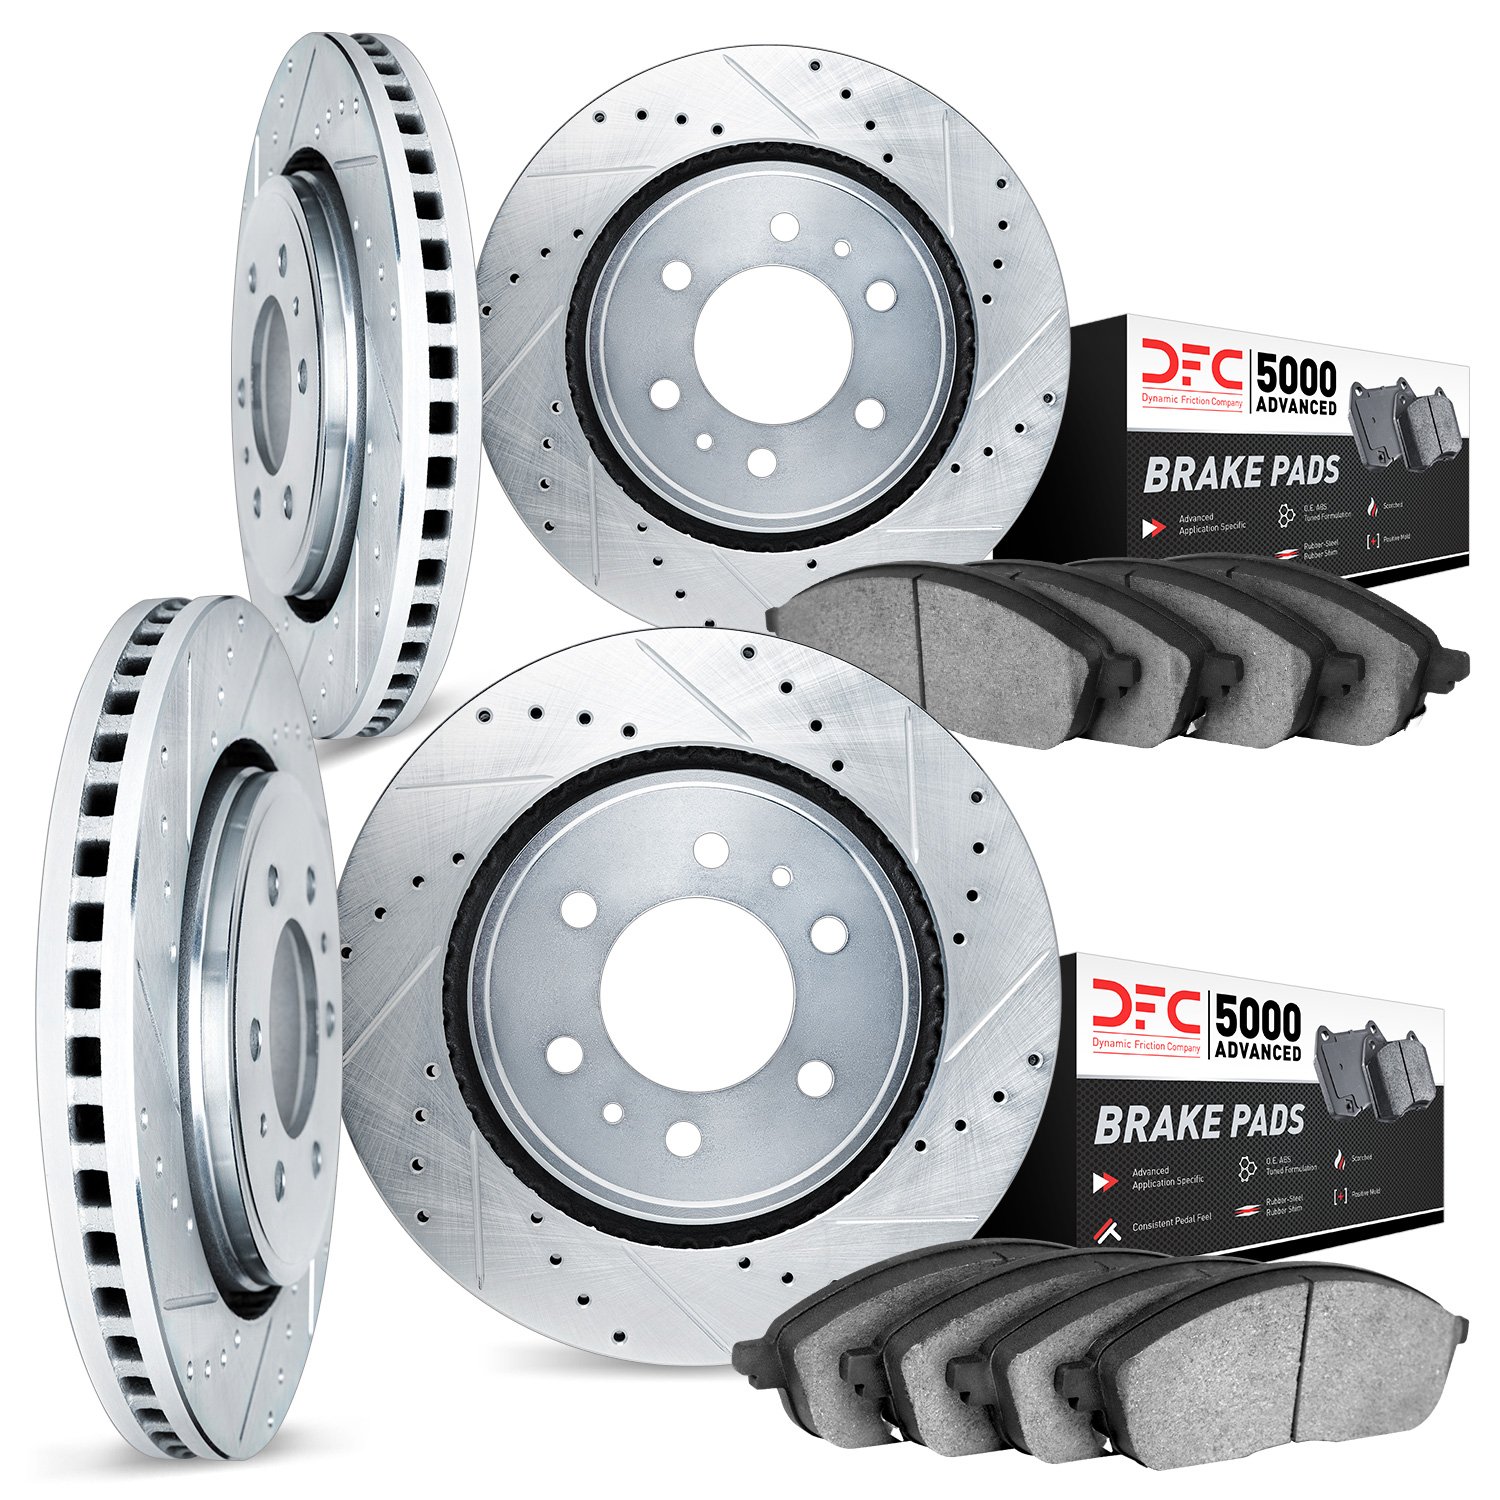 7504-54352 Drilled/Slotted Brake Rotors w/5000 Advanced Brake Pads Kit [Silver], 2004-2008 Ford/Lincoln/Mercury/Mazda, Position: